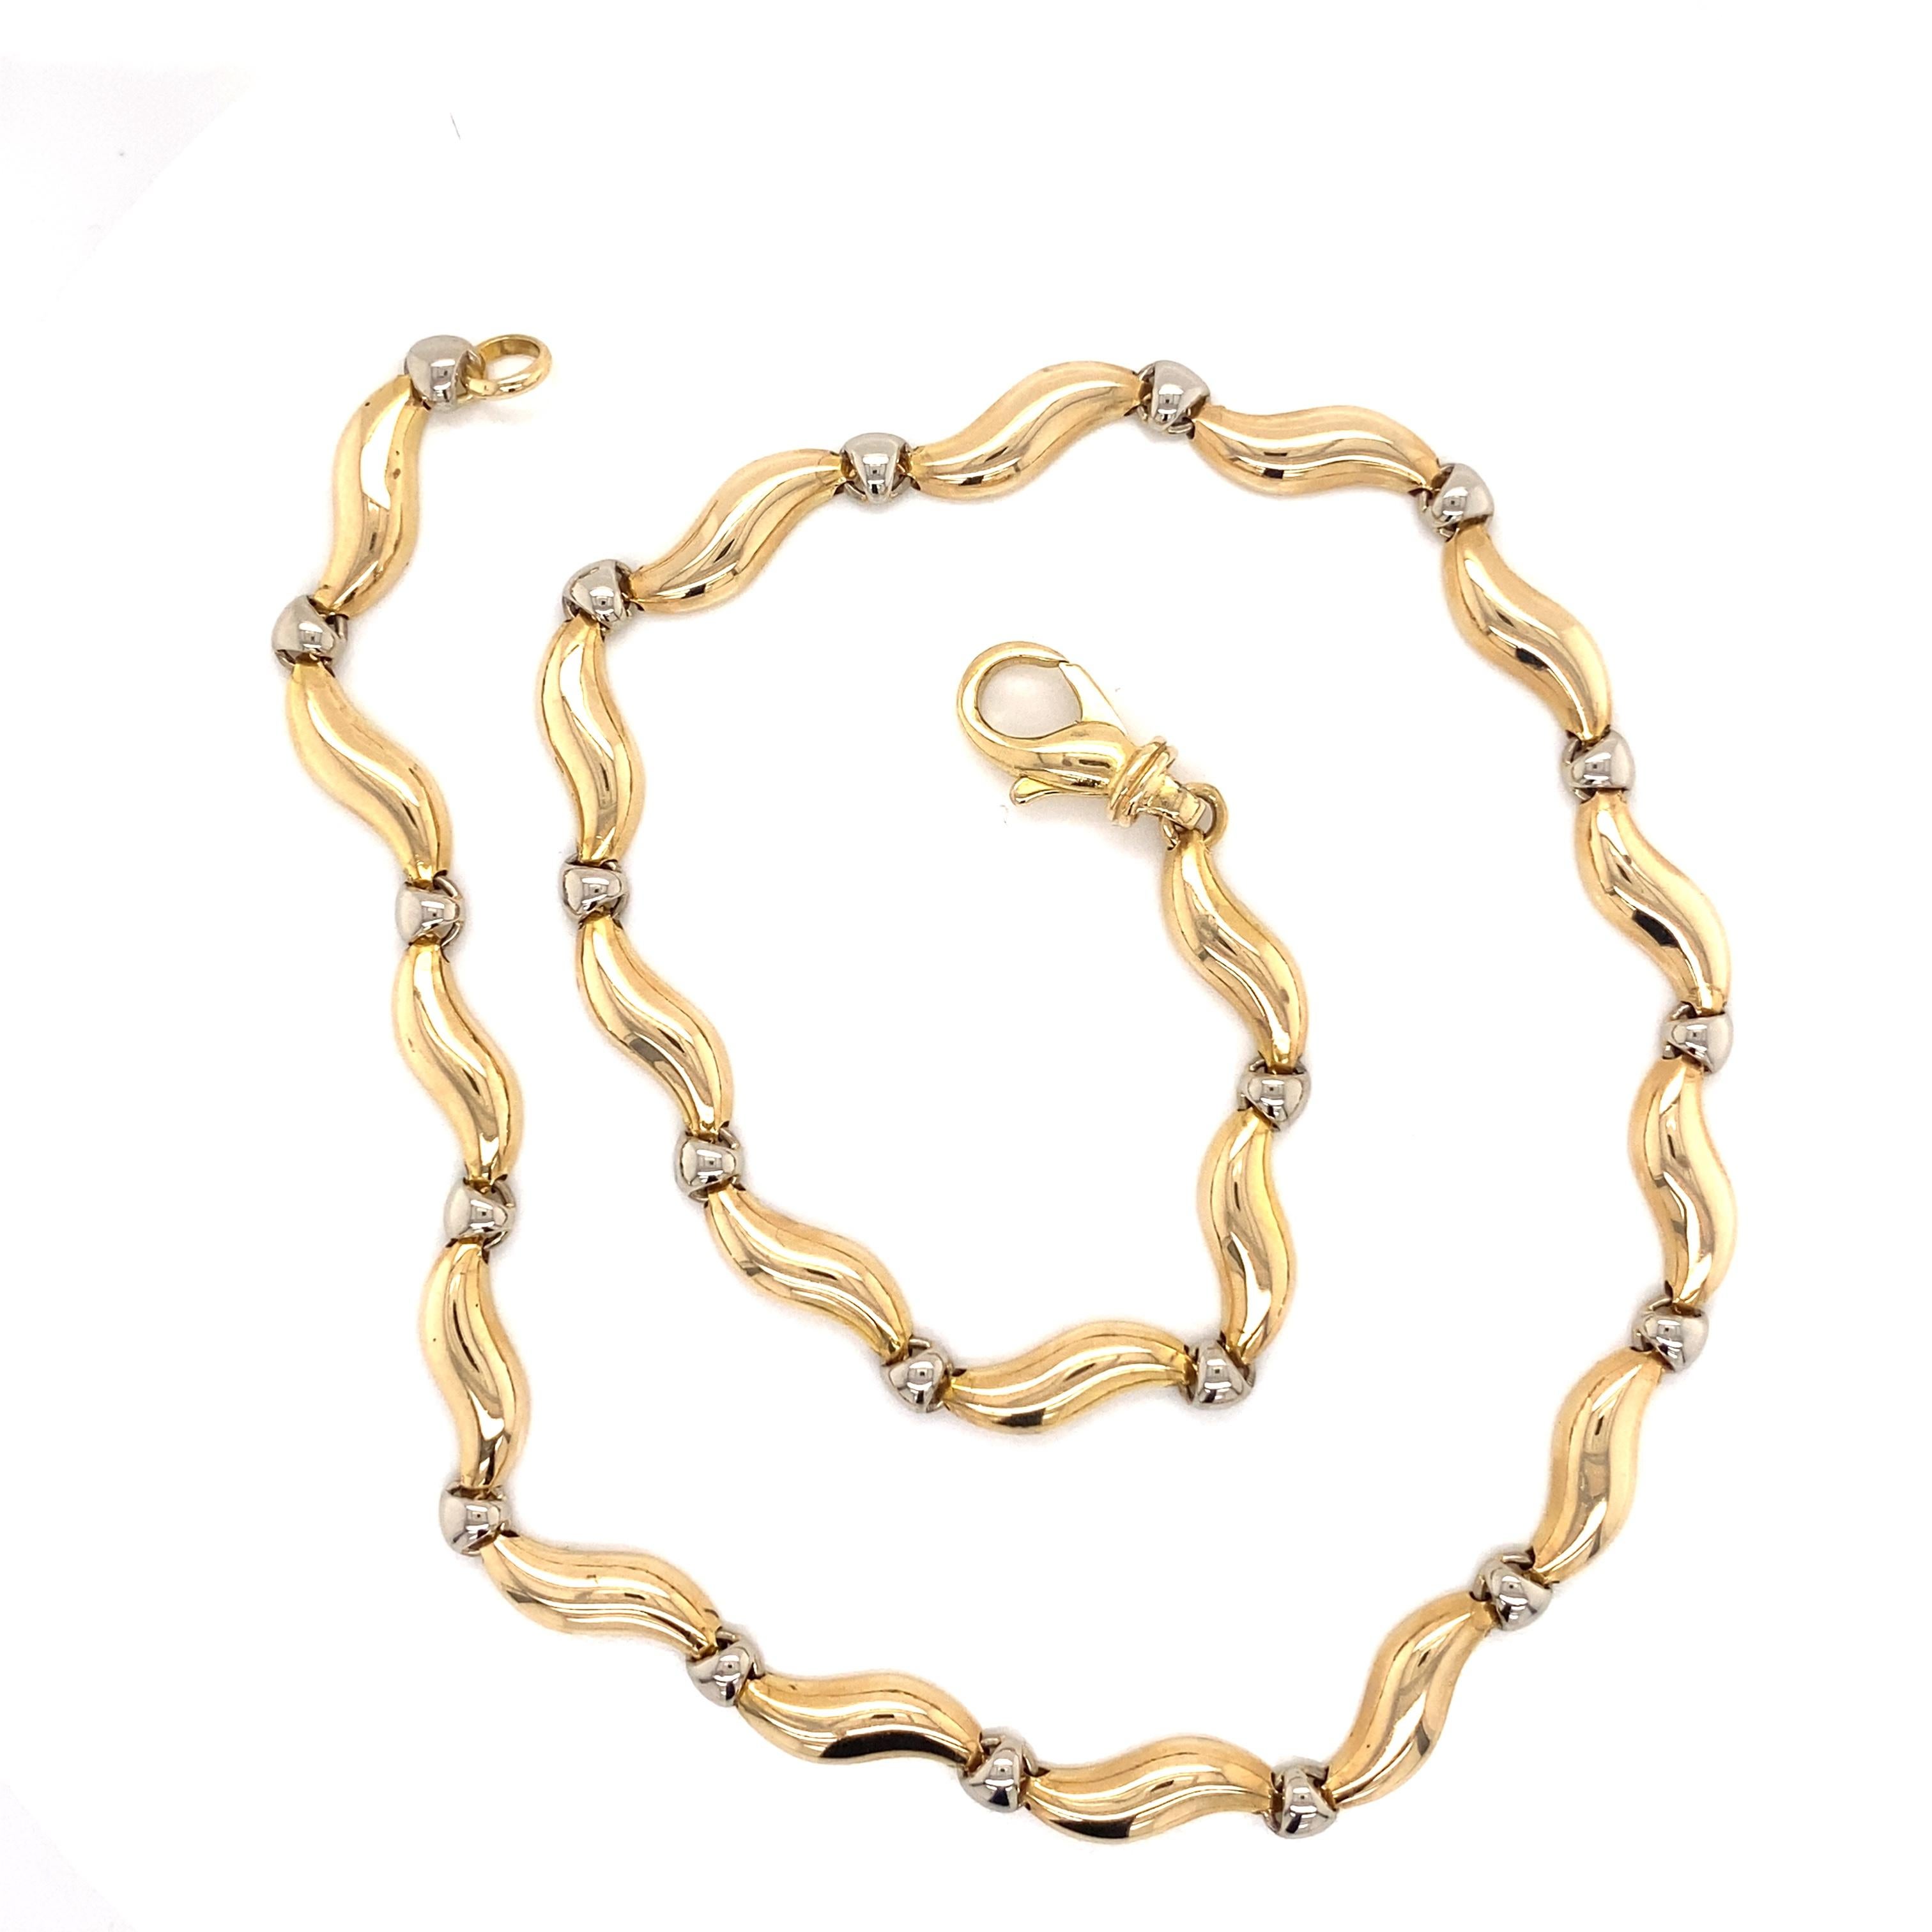 Vintage 1990’s 14K Yellow and White Gold S Link Necklace - The Italian made 2-tone gold necklace has alternating yellow gold modern S links connected by white gold round links. The necklace is 5mm wide and 16 inches long and features a beautiful